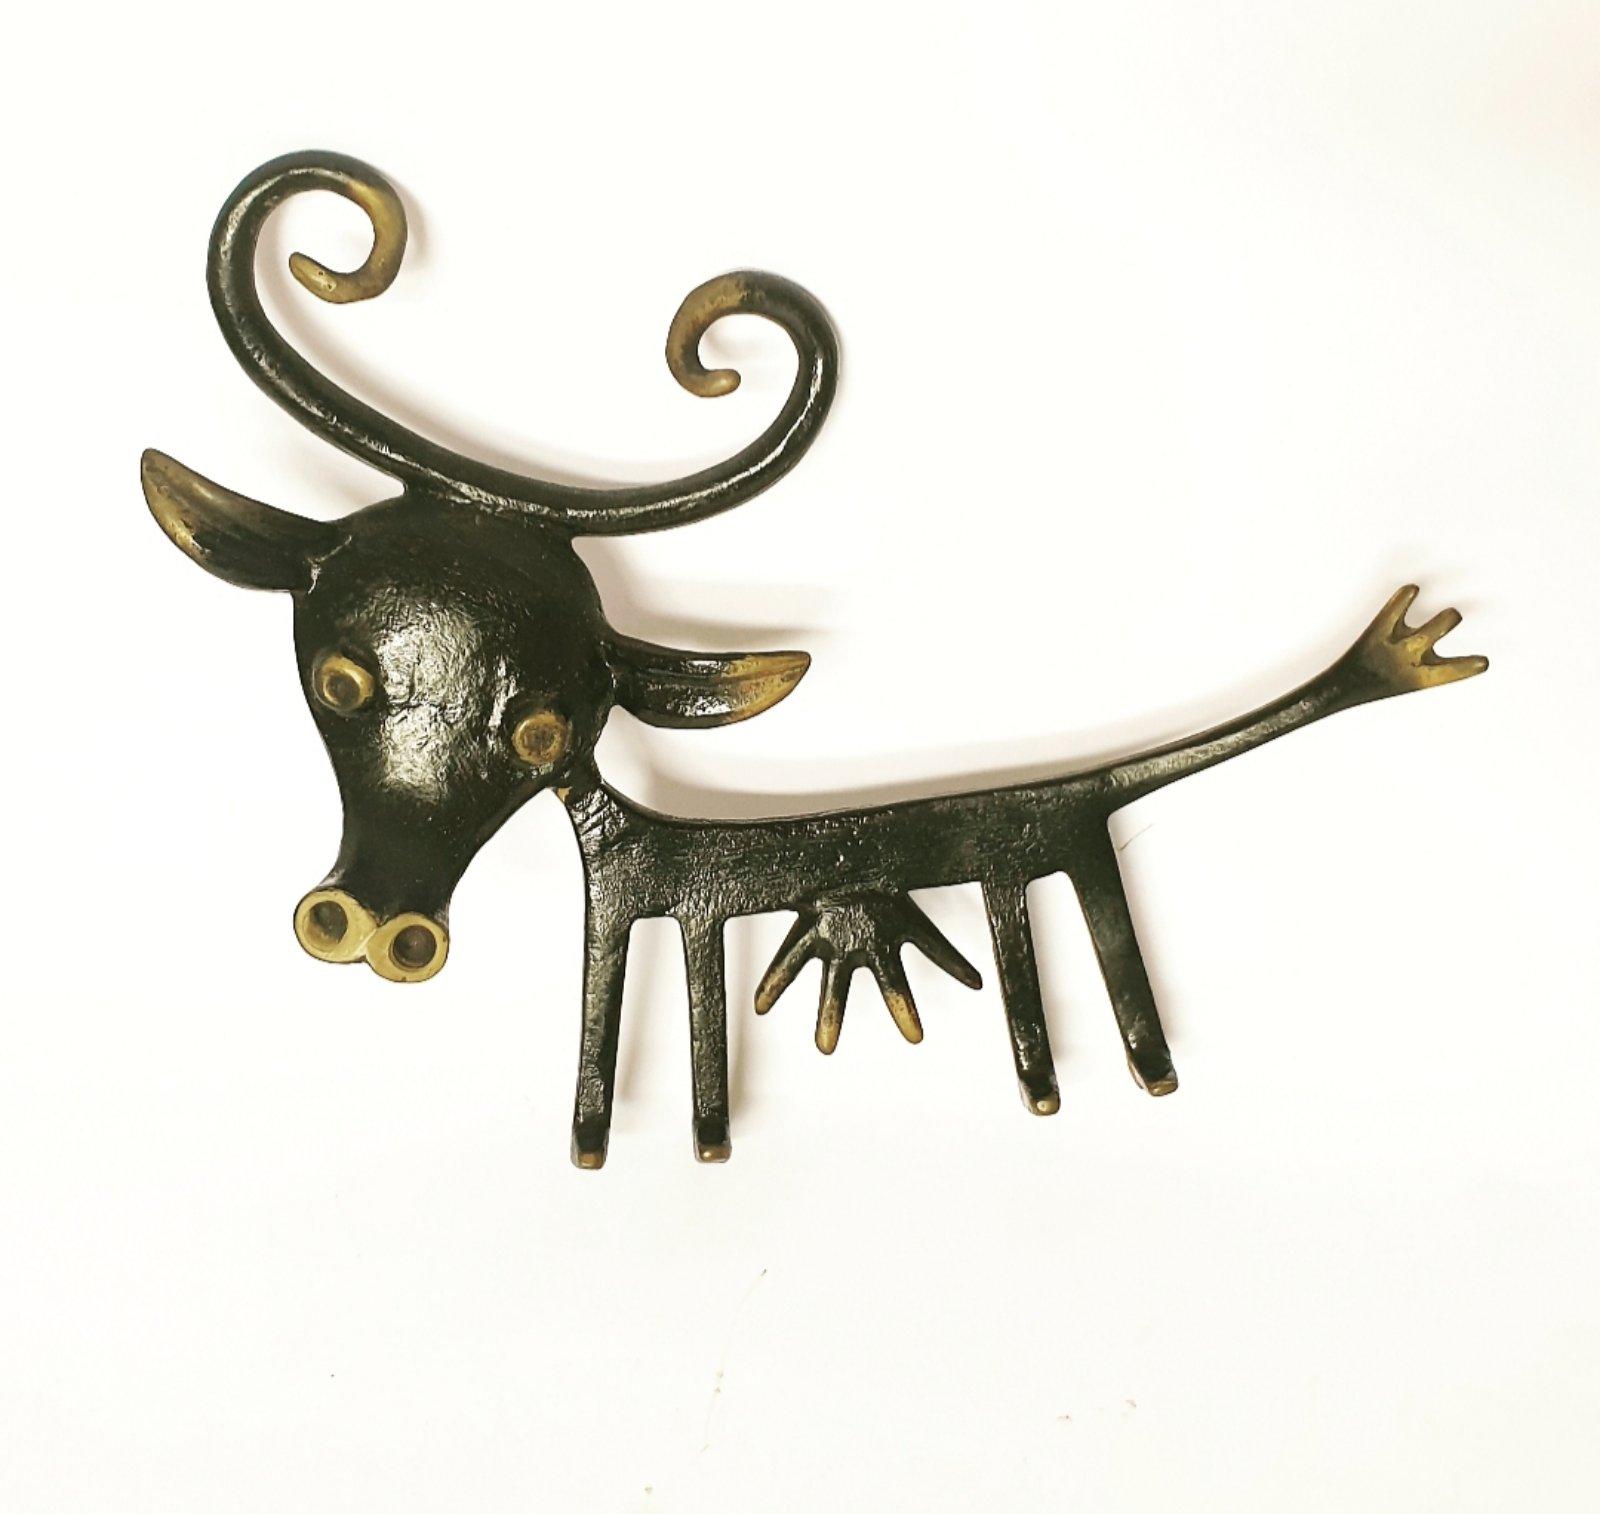 Very Special and Rare Key Holder, displaying a funny looking cow. Very large. This is a original piece, not a reproduction.

Designed by Walter Bosse, manufactured by Hertha Baller, Vienna in the 1950s.

This Key Holder is in excellent vintage